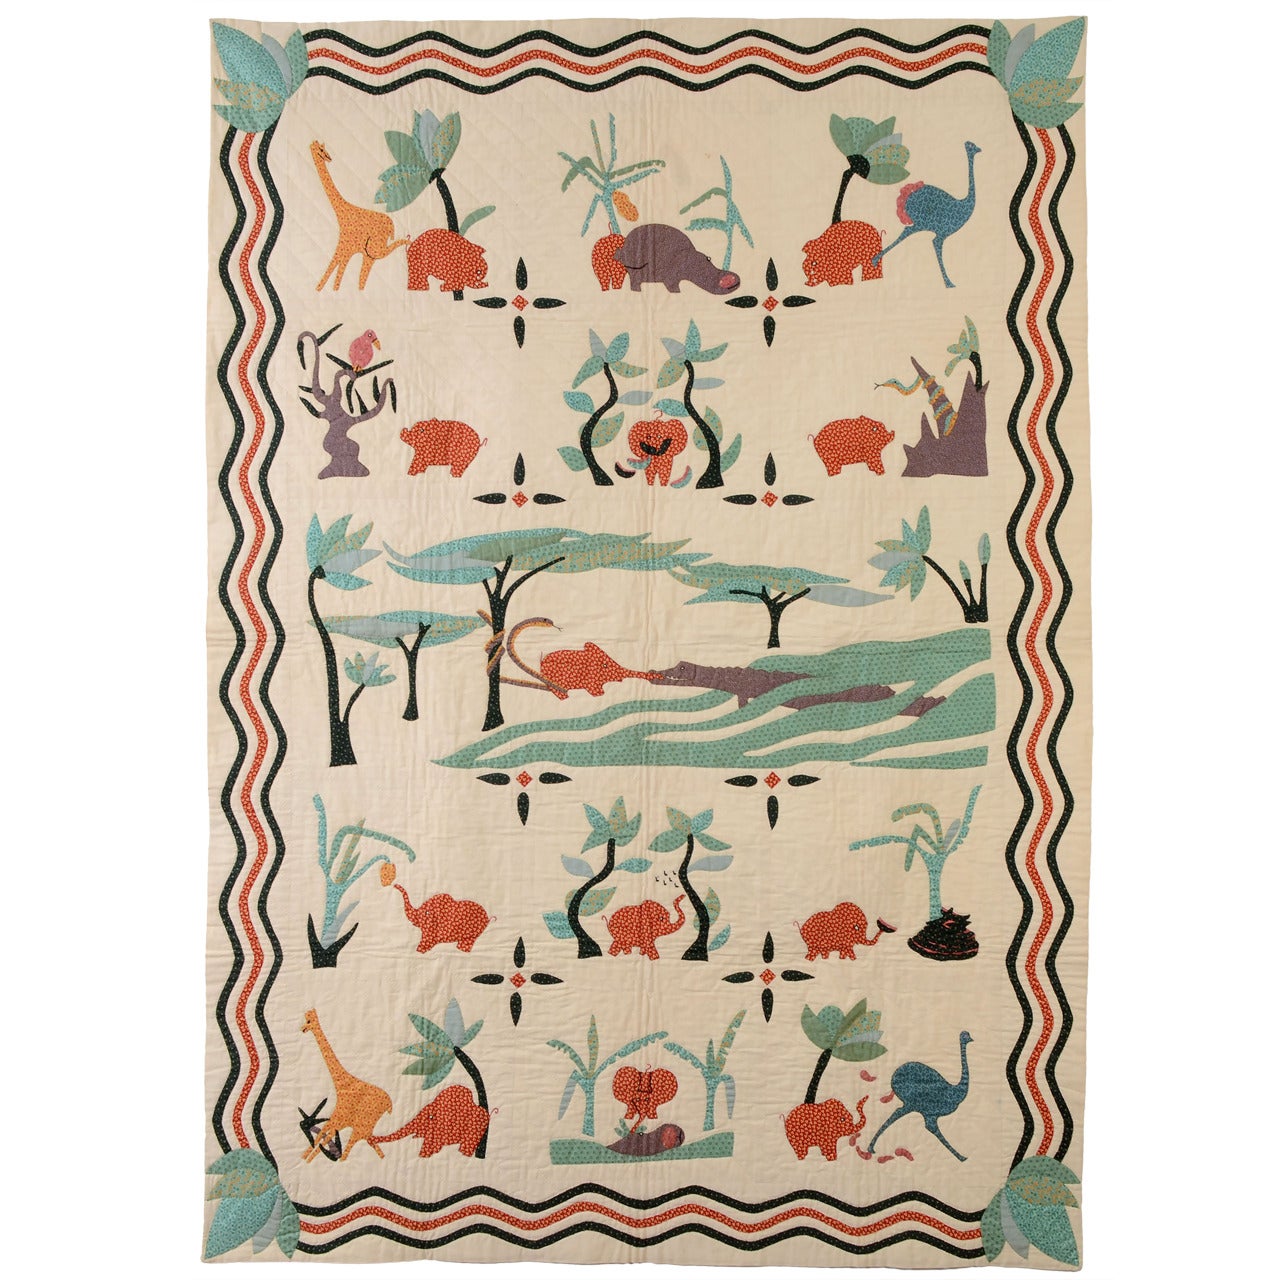 "How the Elephant Got HIs Trunk" Quilt